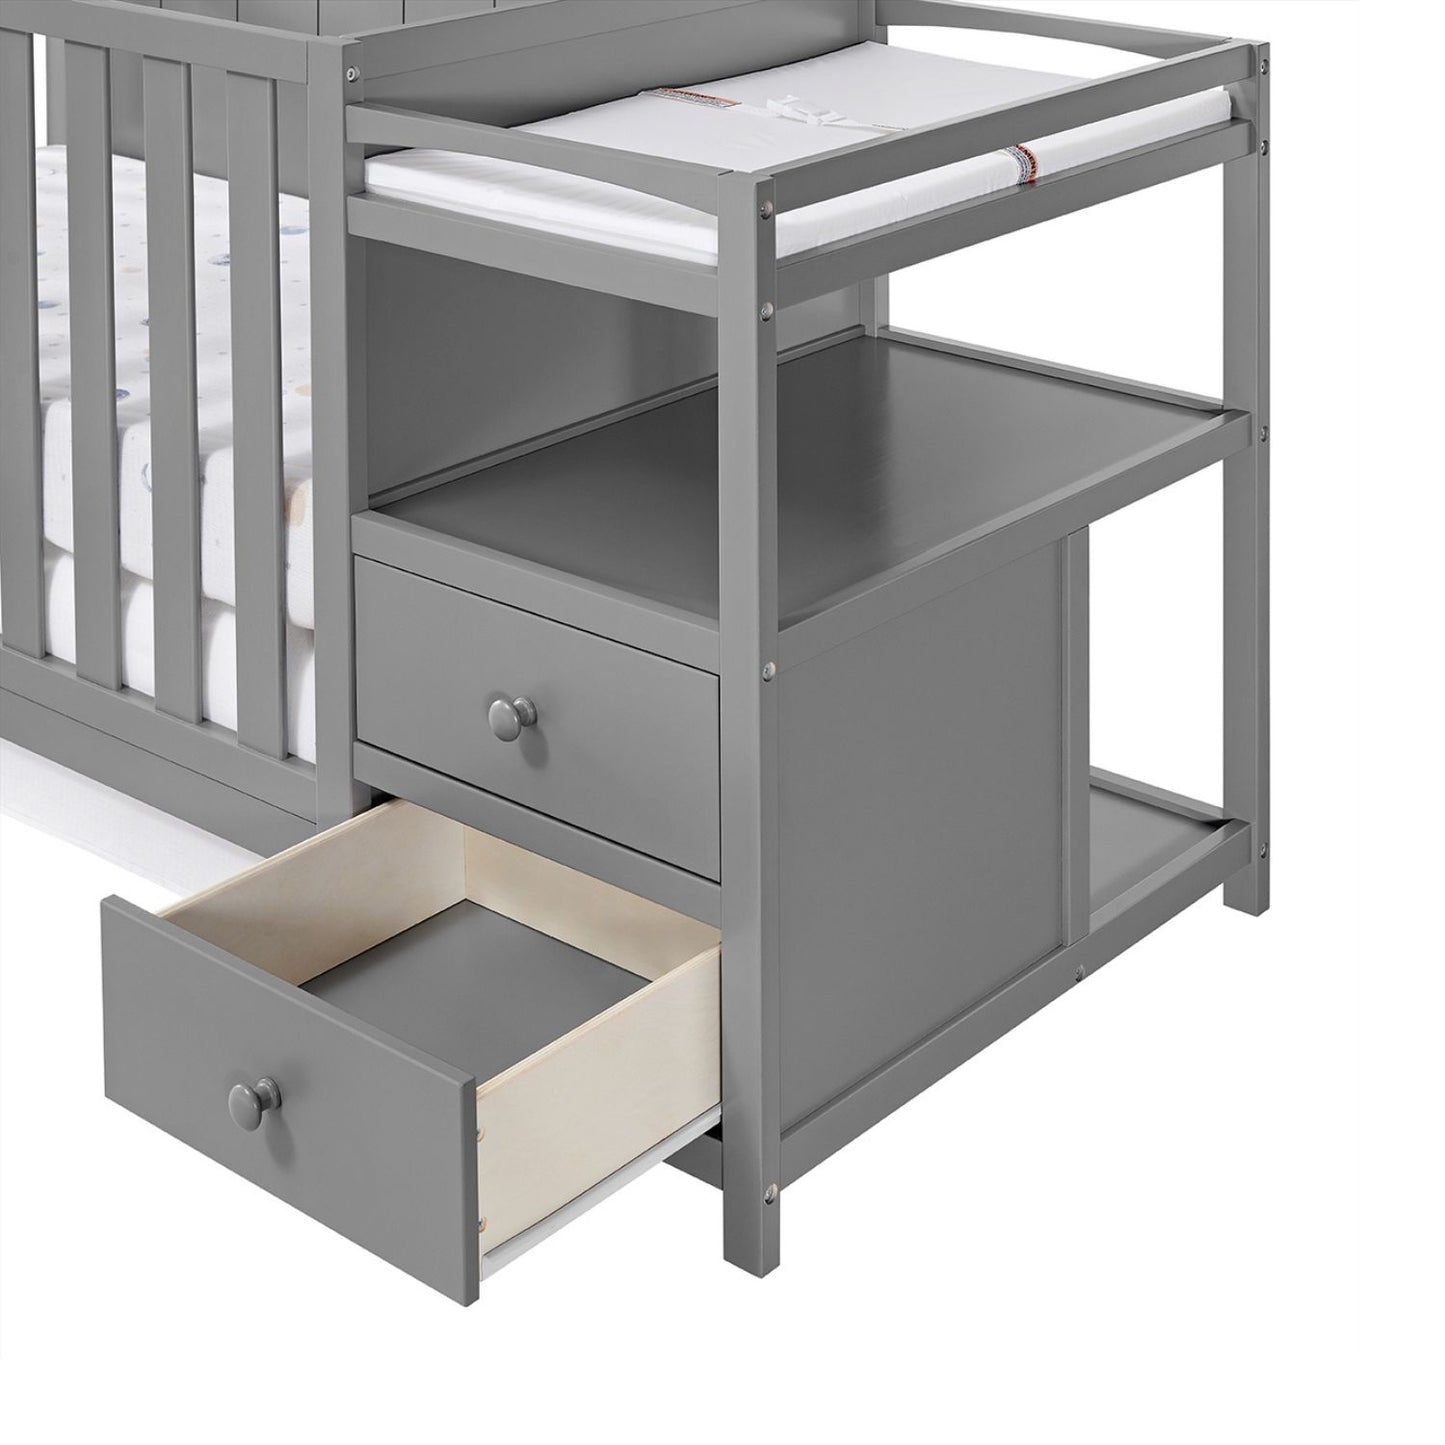 Oxford Baby Pearson Crib and Changer Combo | Dove Gray